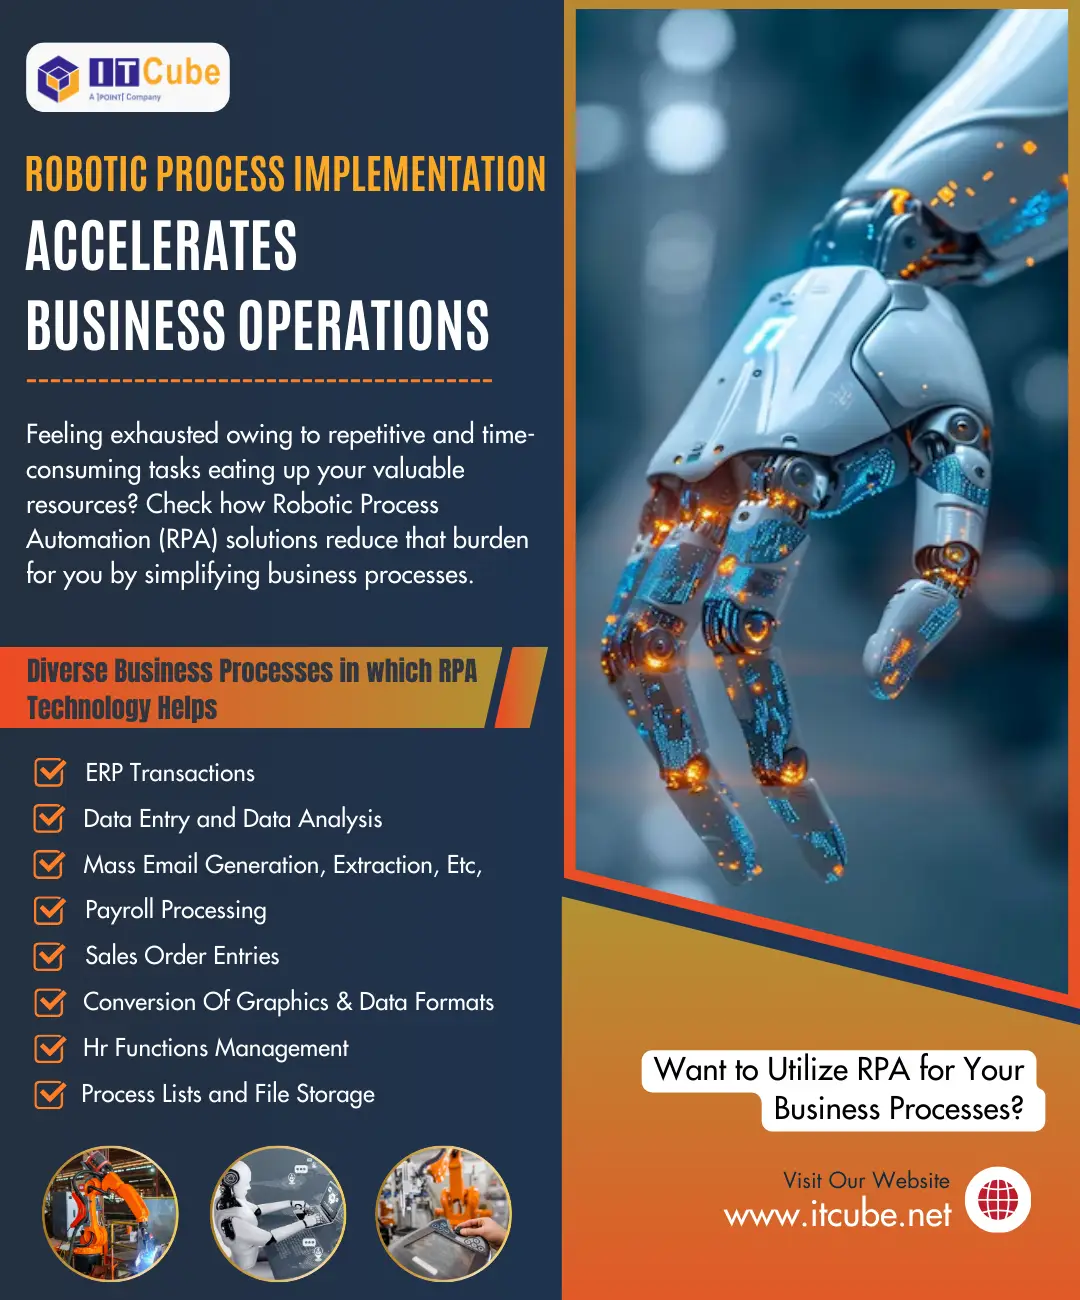 How Robotic Process Implementation Accelerates Business Operations